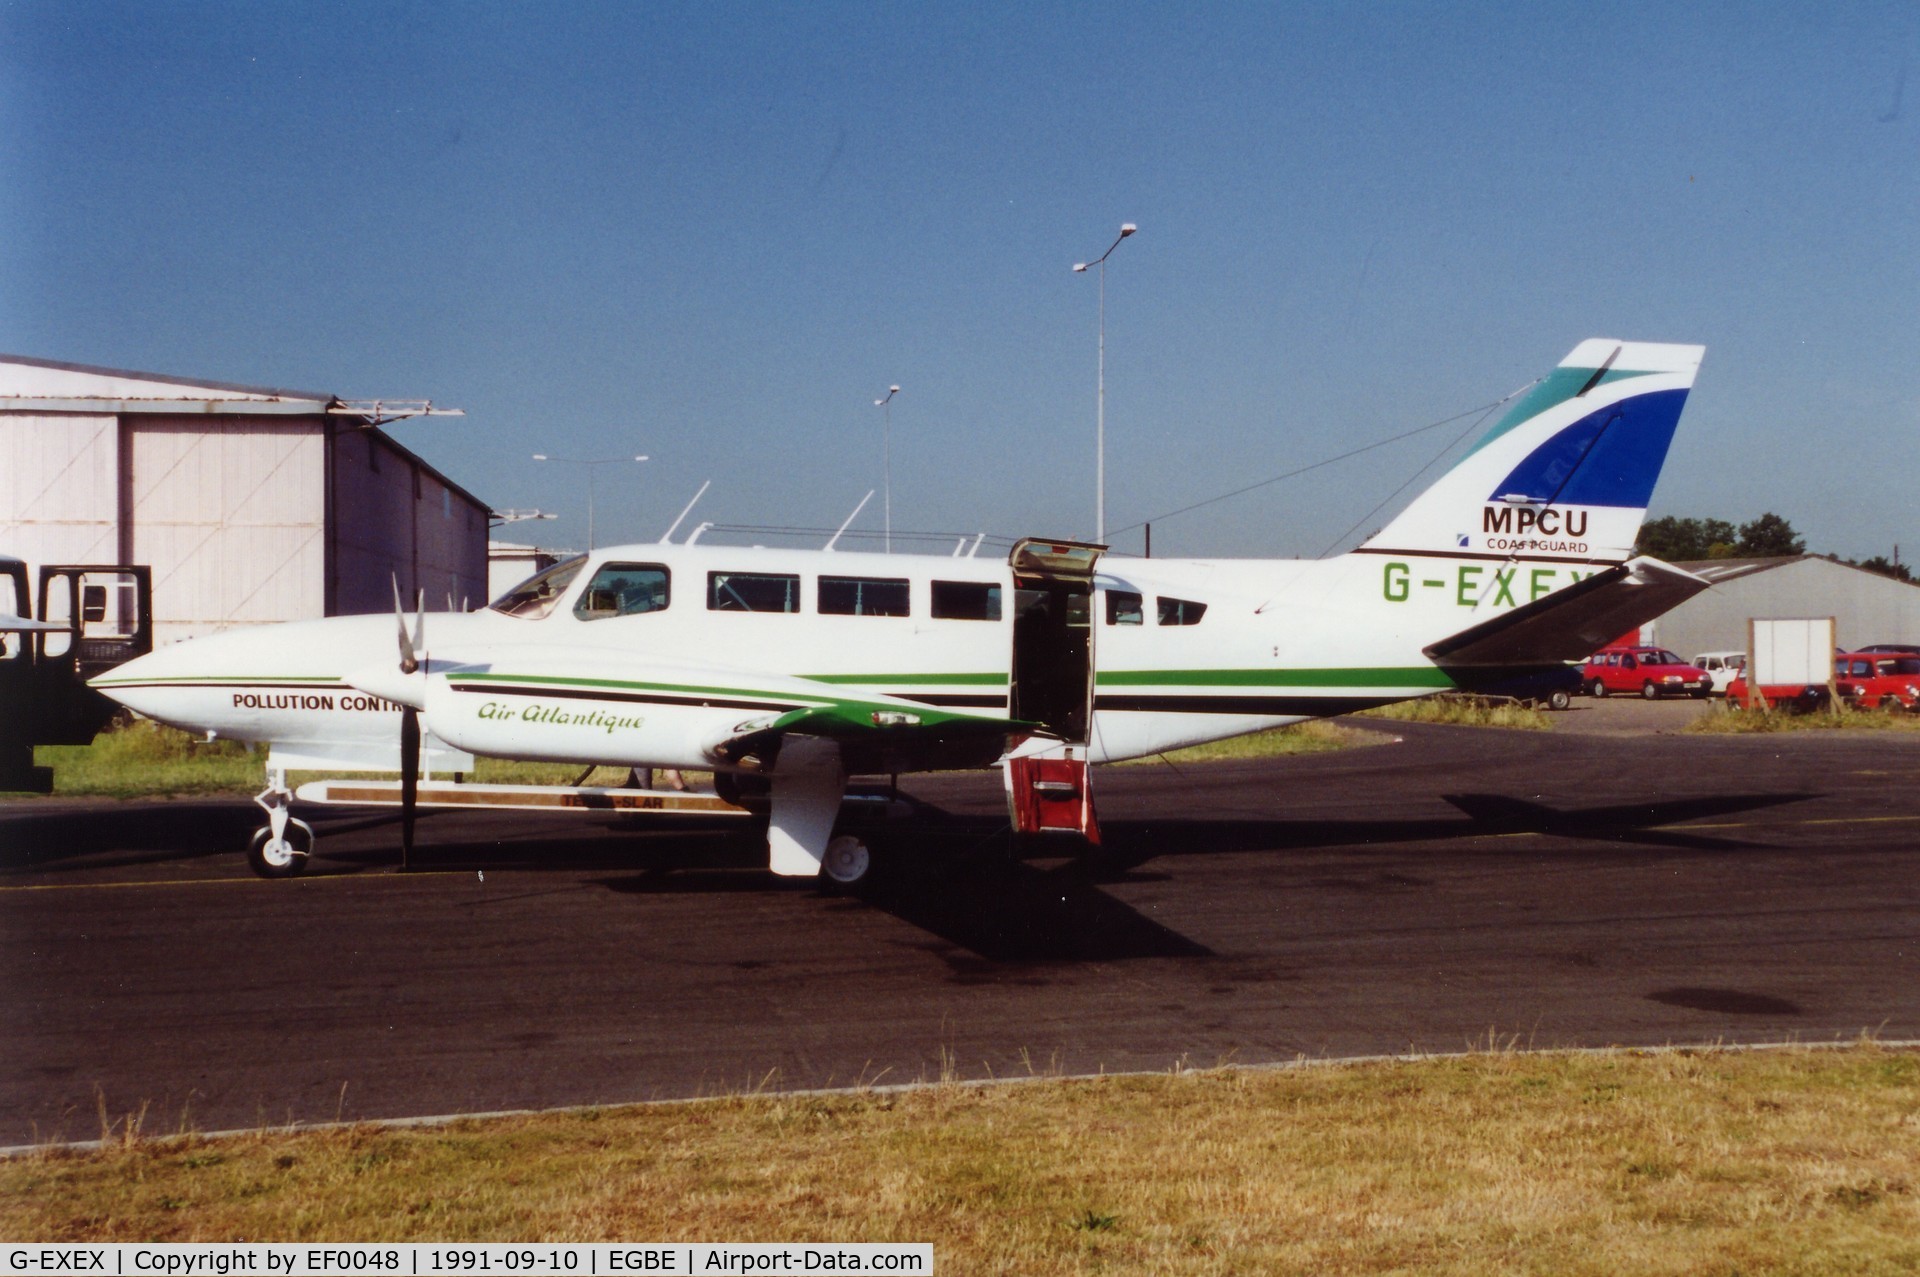 G-EXEX, 1977 Cessna 404 Titan C/N 404-0037, Ready for a marine pollution control mission. Scanned from slide